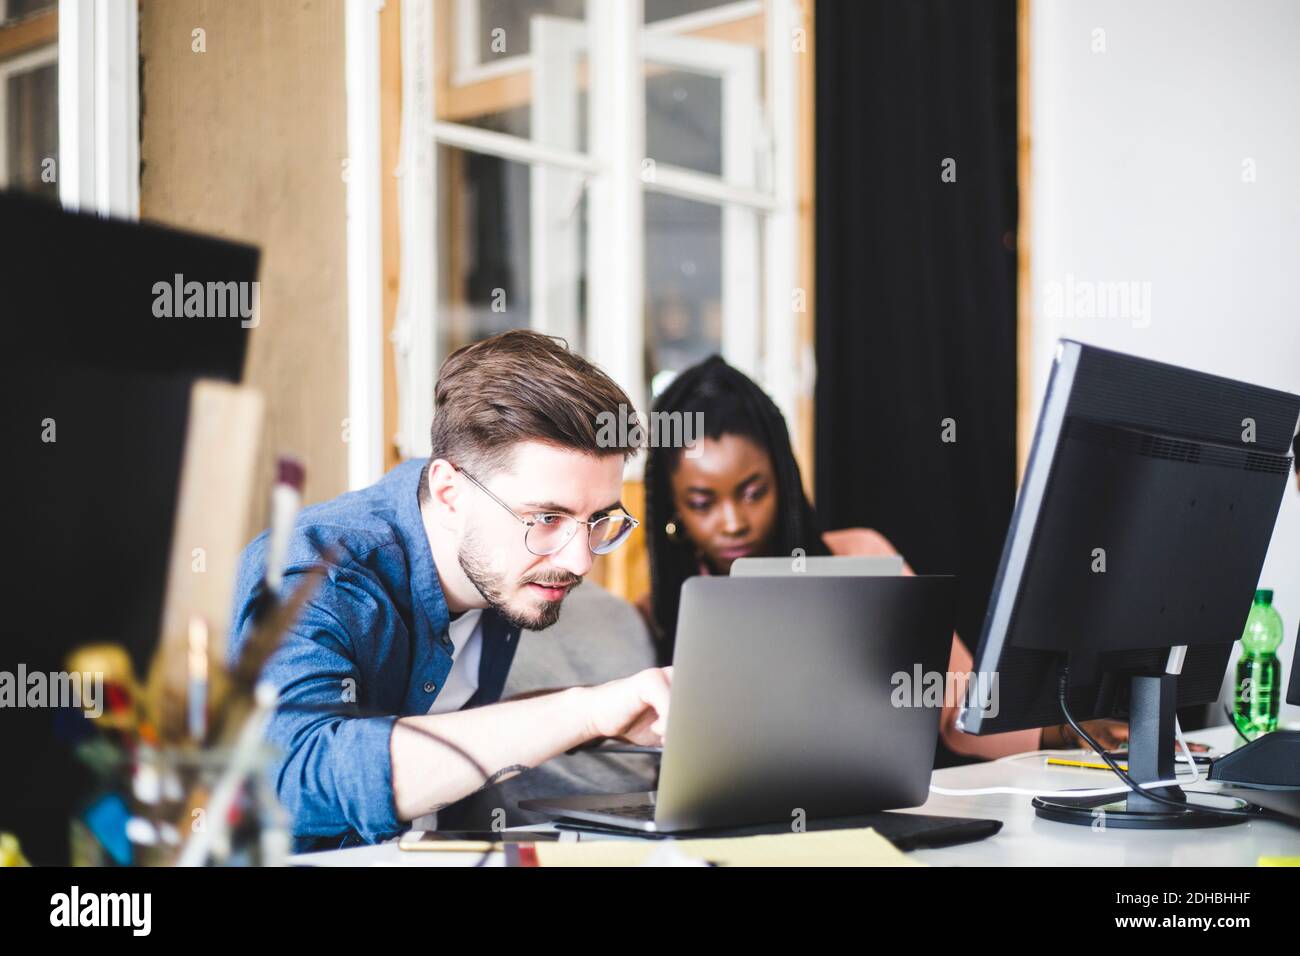 Young computer expert coding in laptop while working with female colleague at workplace Stock Photo